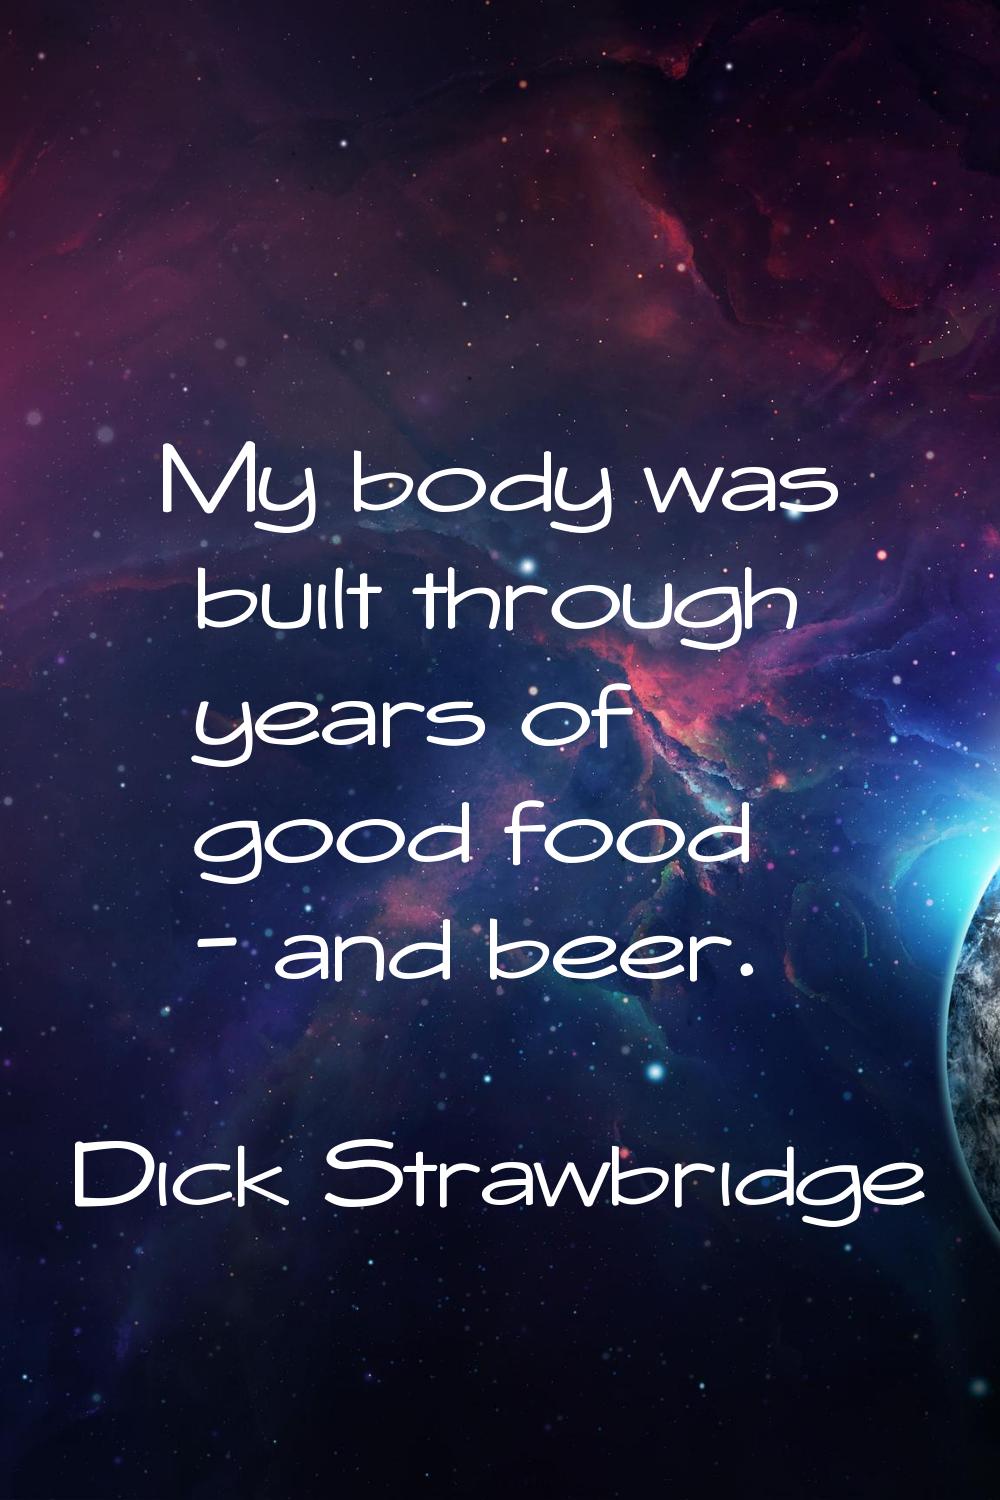 My body was built through years of good food - and beer.